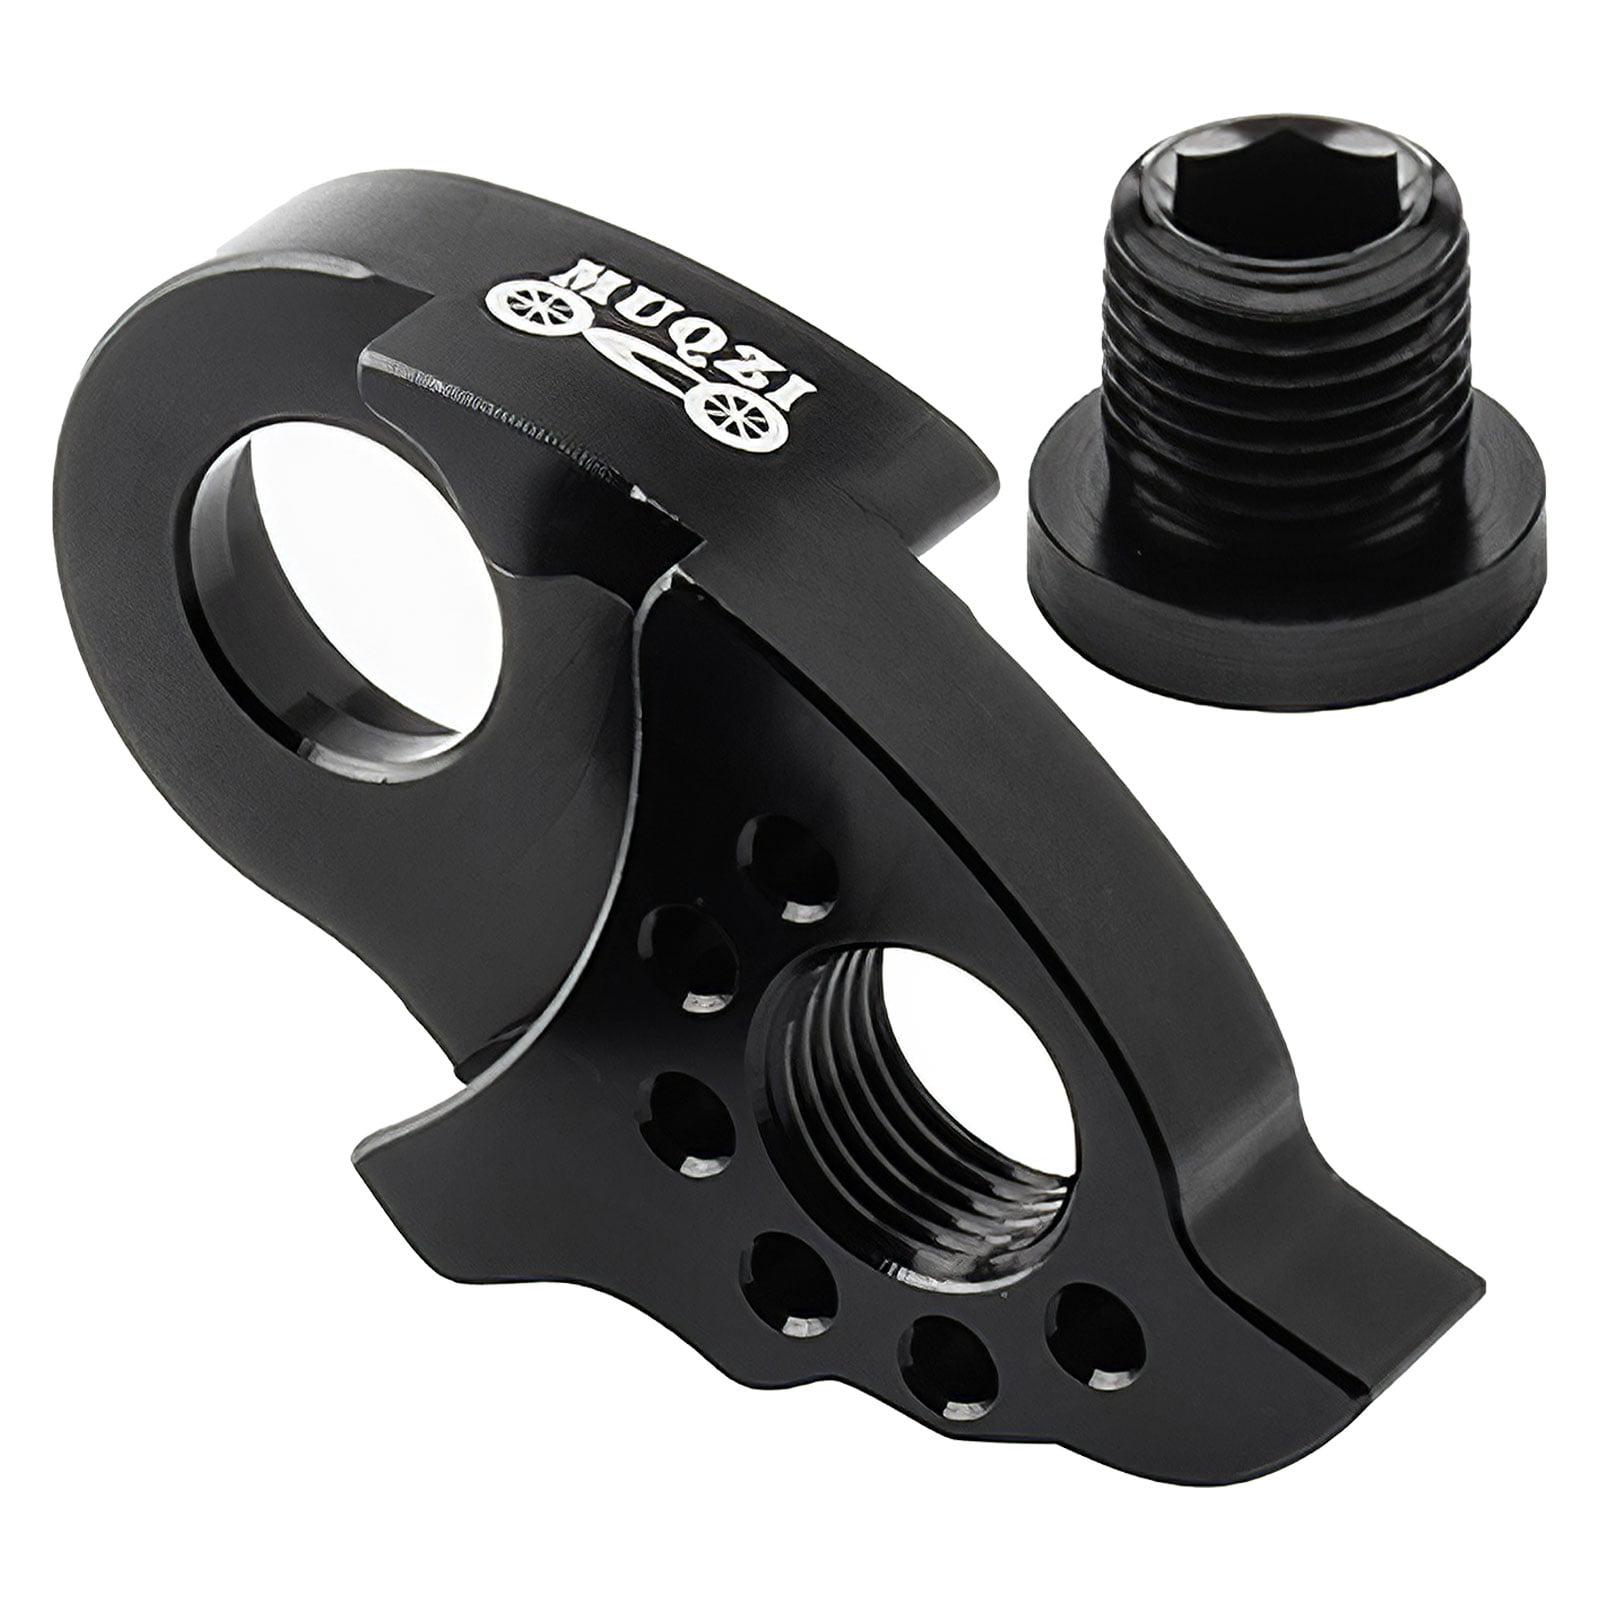 Details about   1 PC Tail Hook Racing Durable Derailleur Frame Hook for Road Bike Mountain Bike 